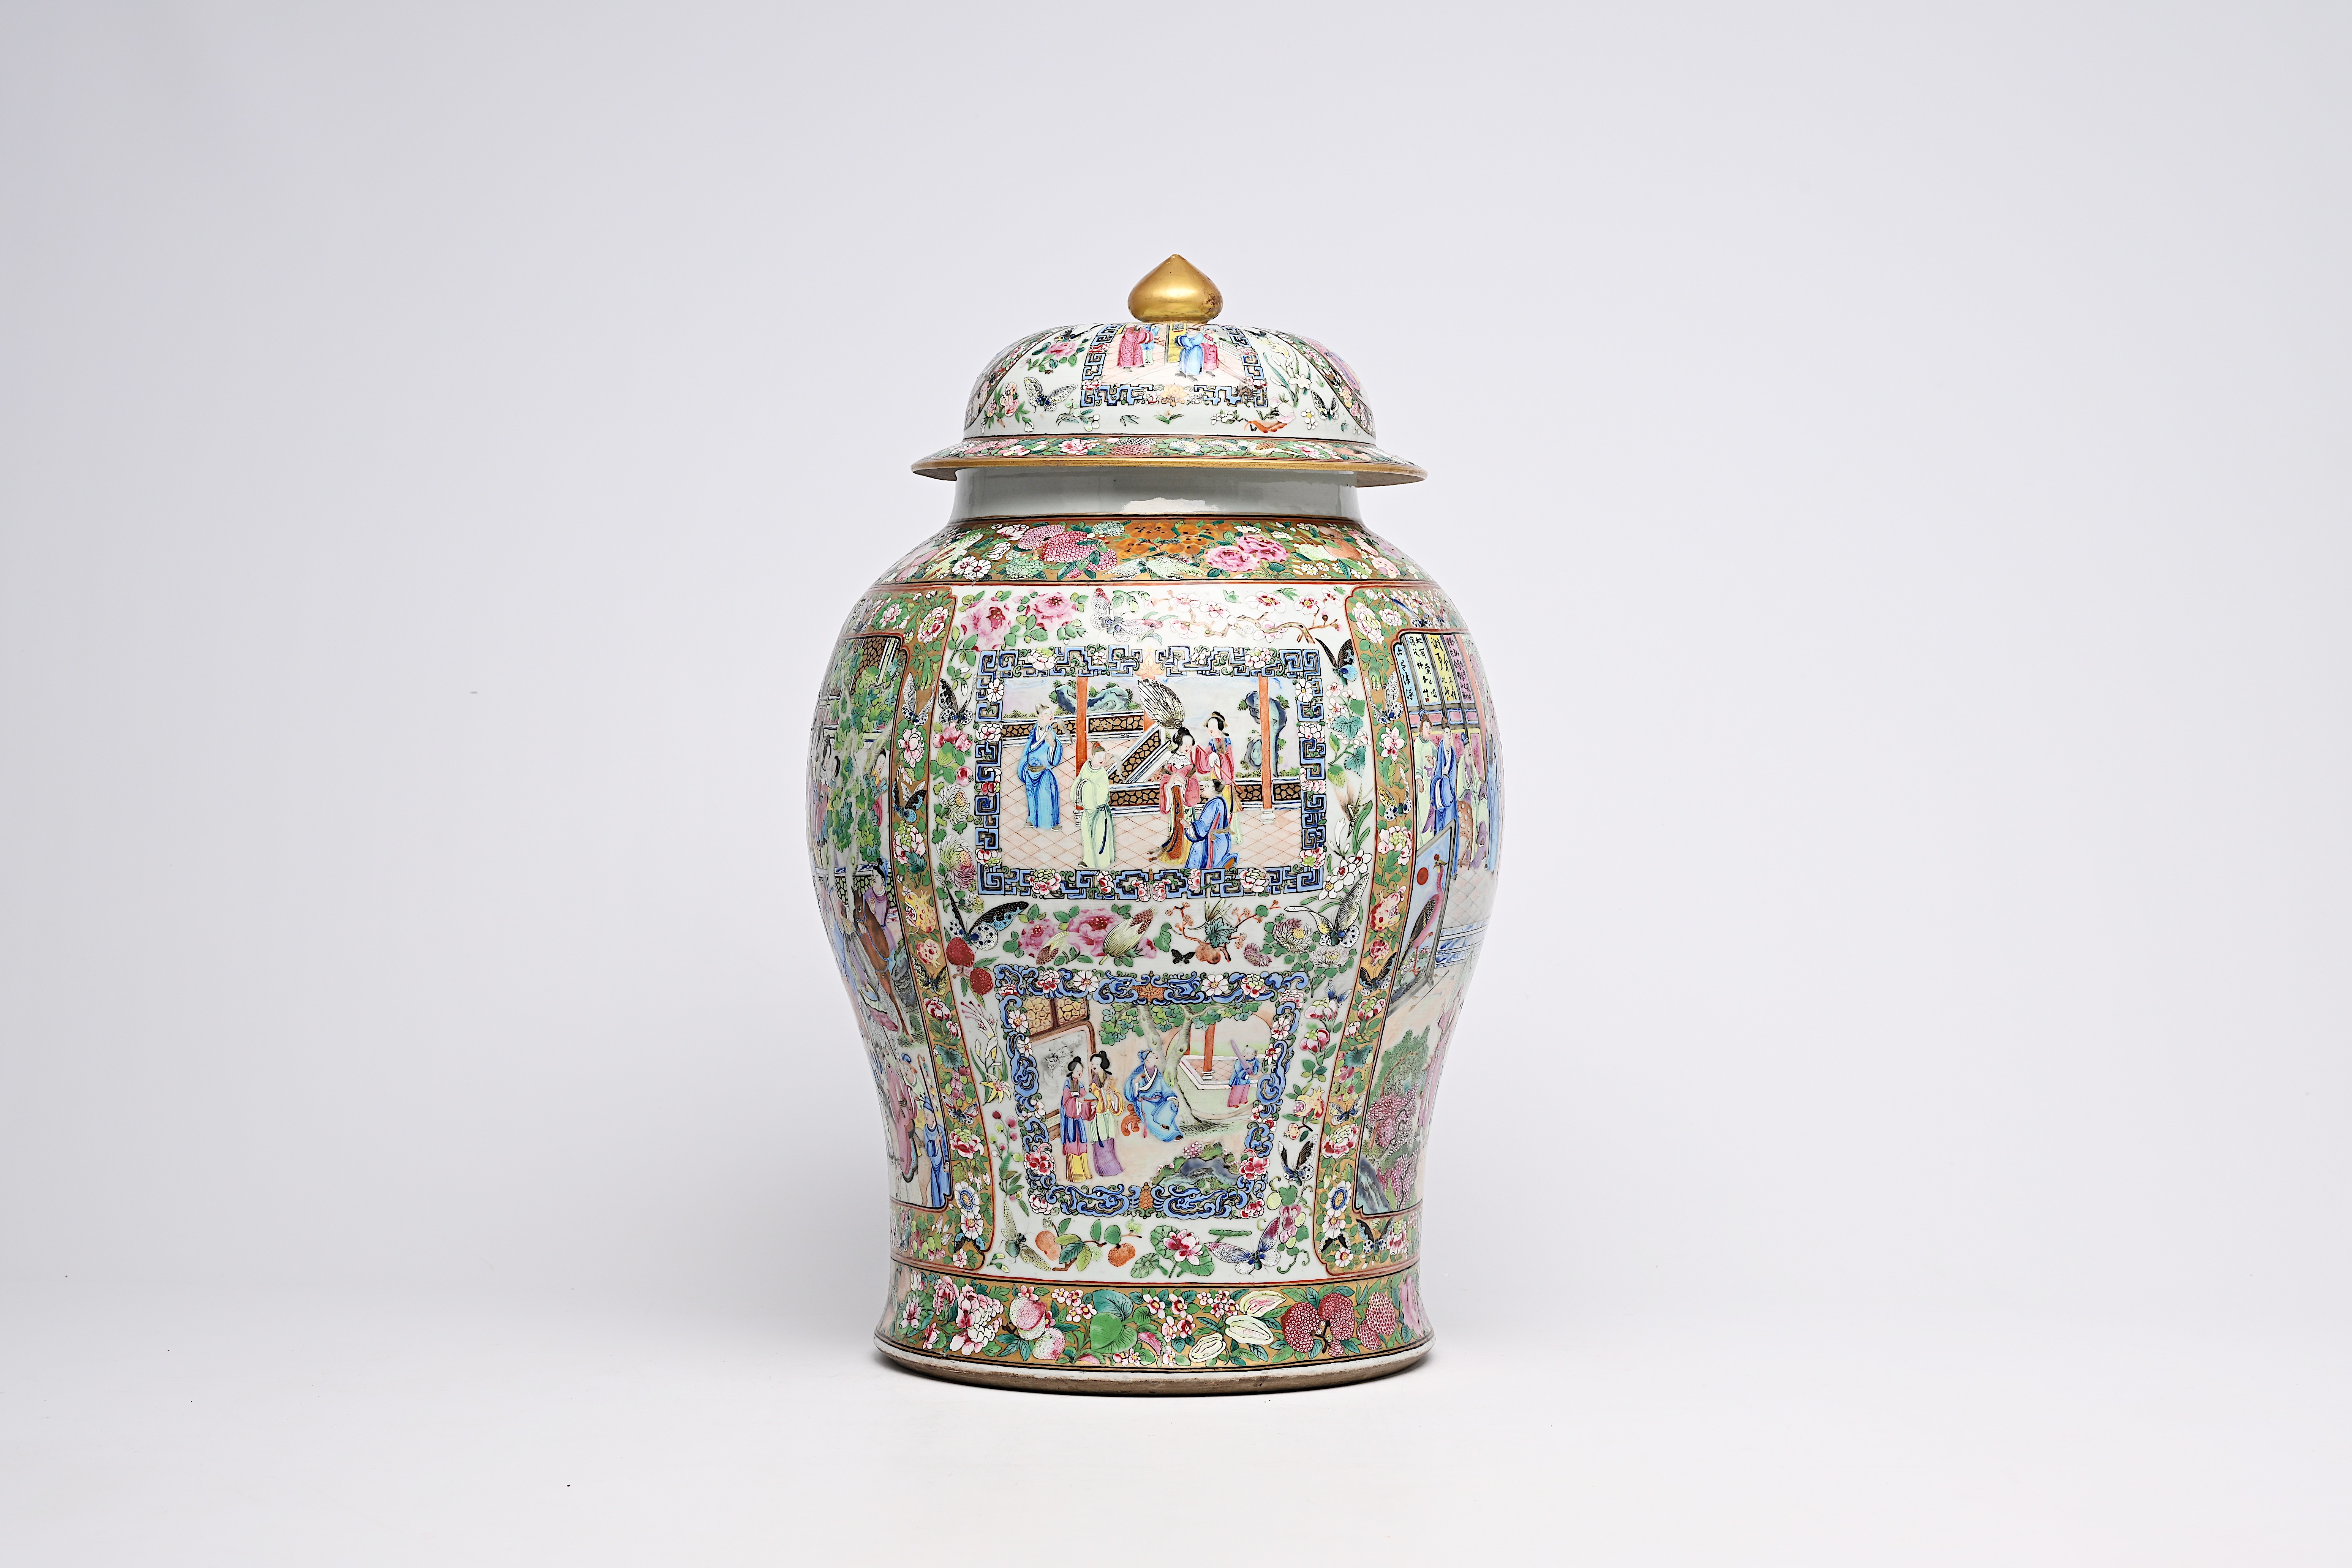 A fine Chinese Canton famille rose vase and cover with palace scenes and floral design, 19th C. - Image 6 of 9